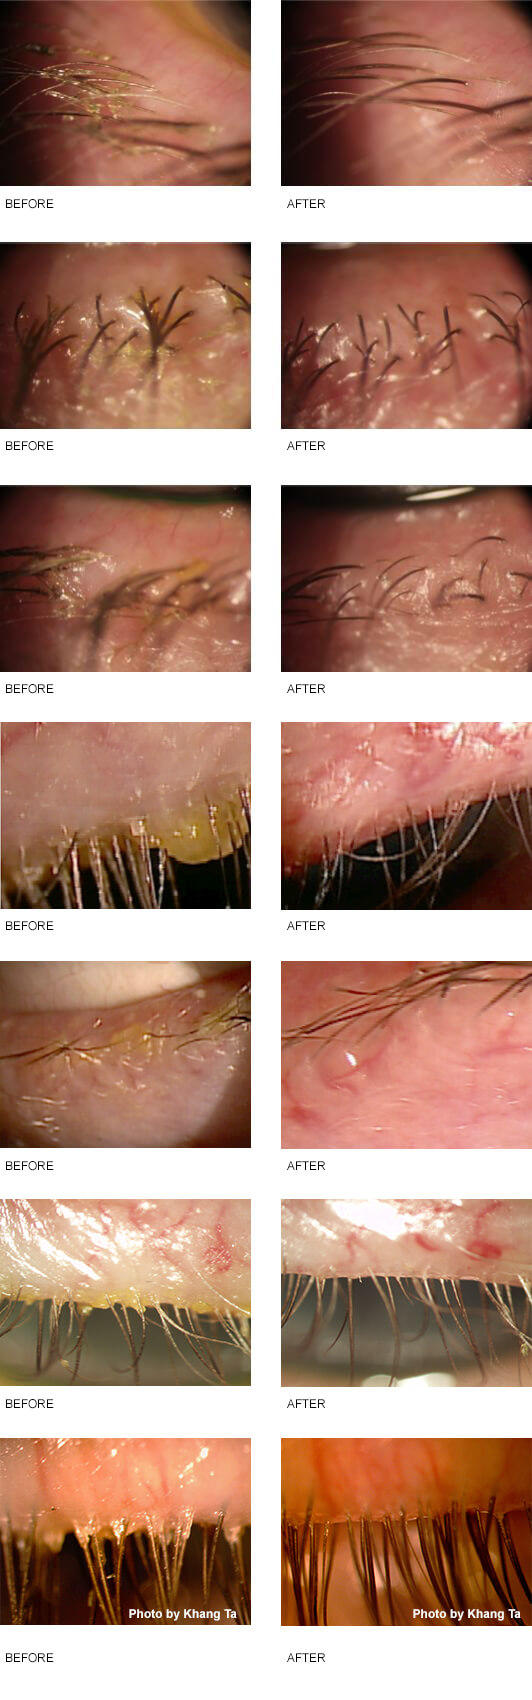 Blepharitis Before and After